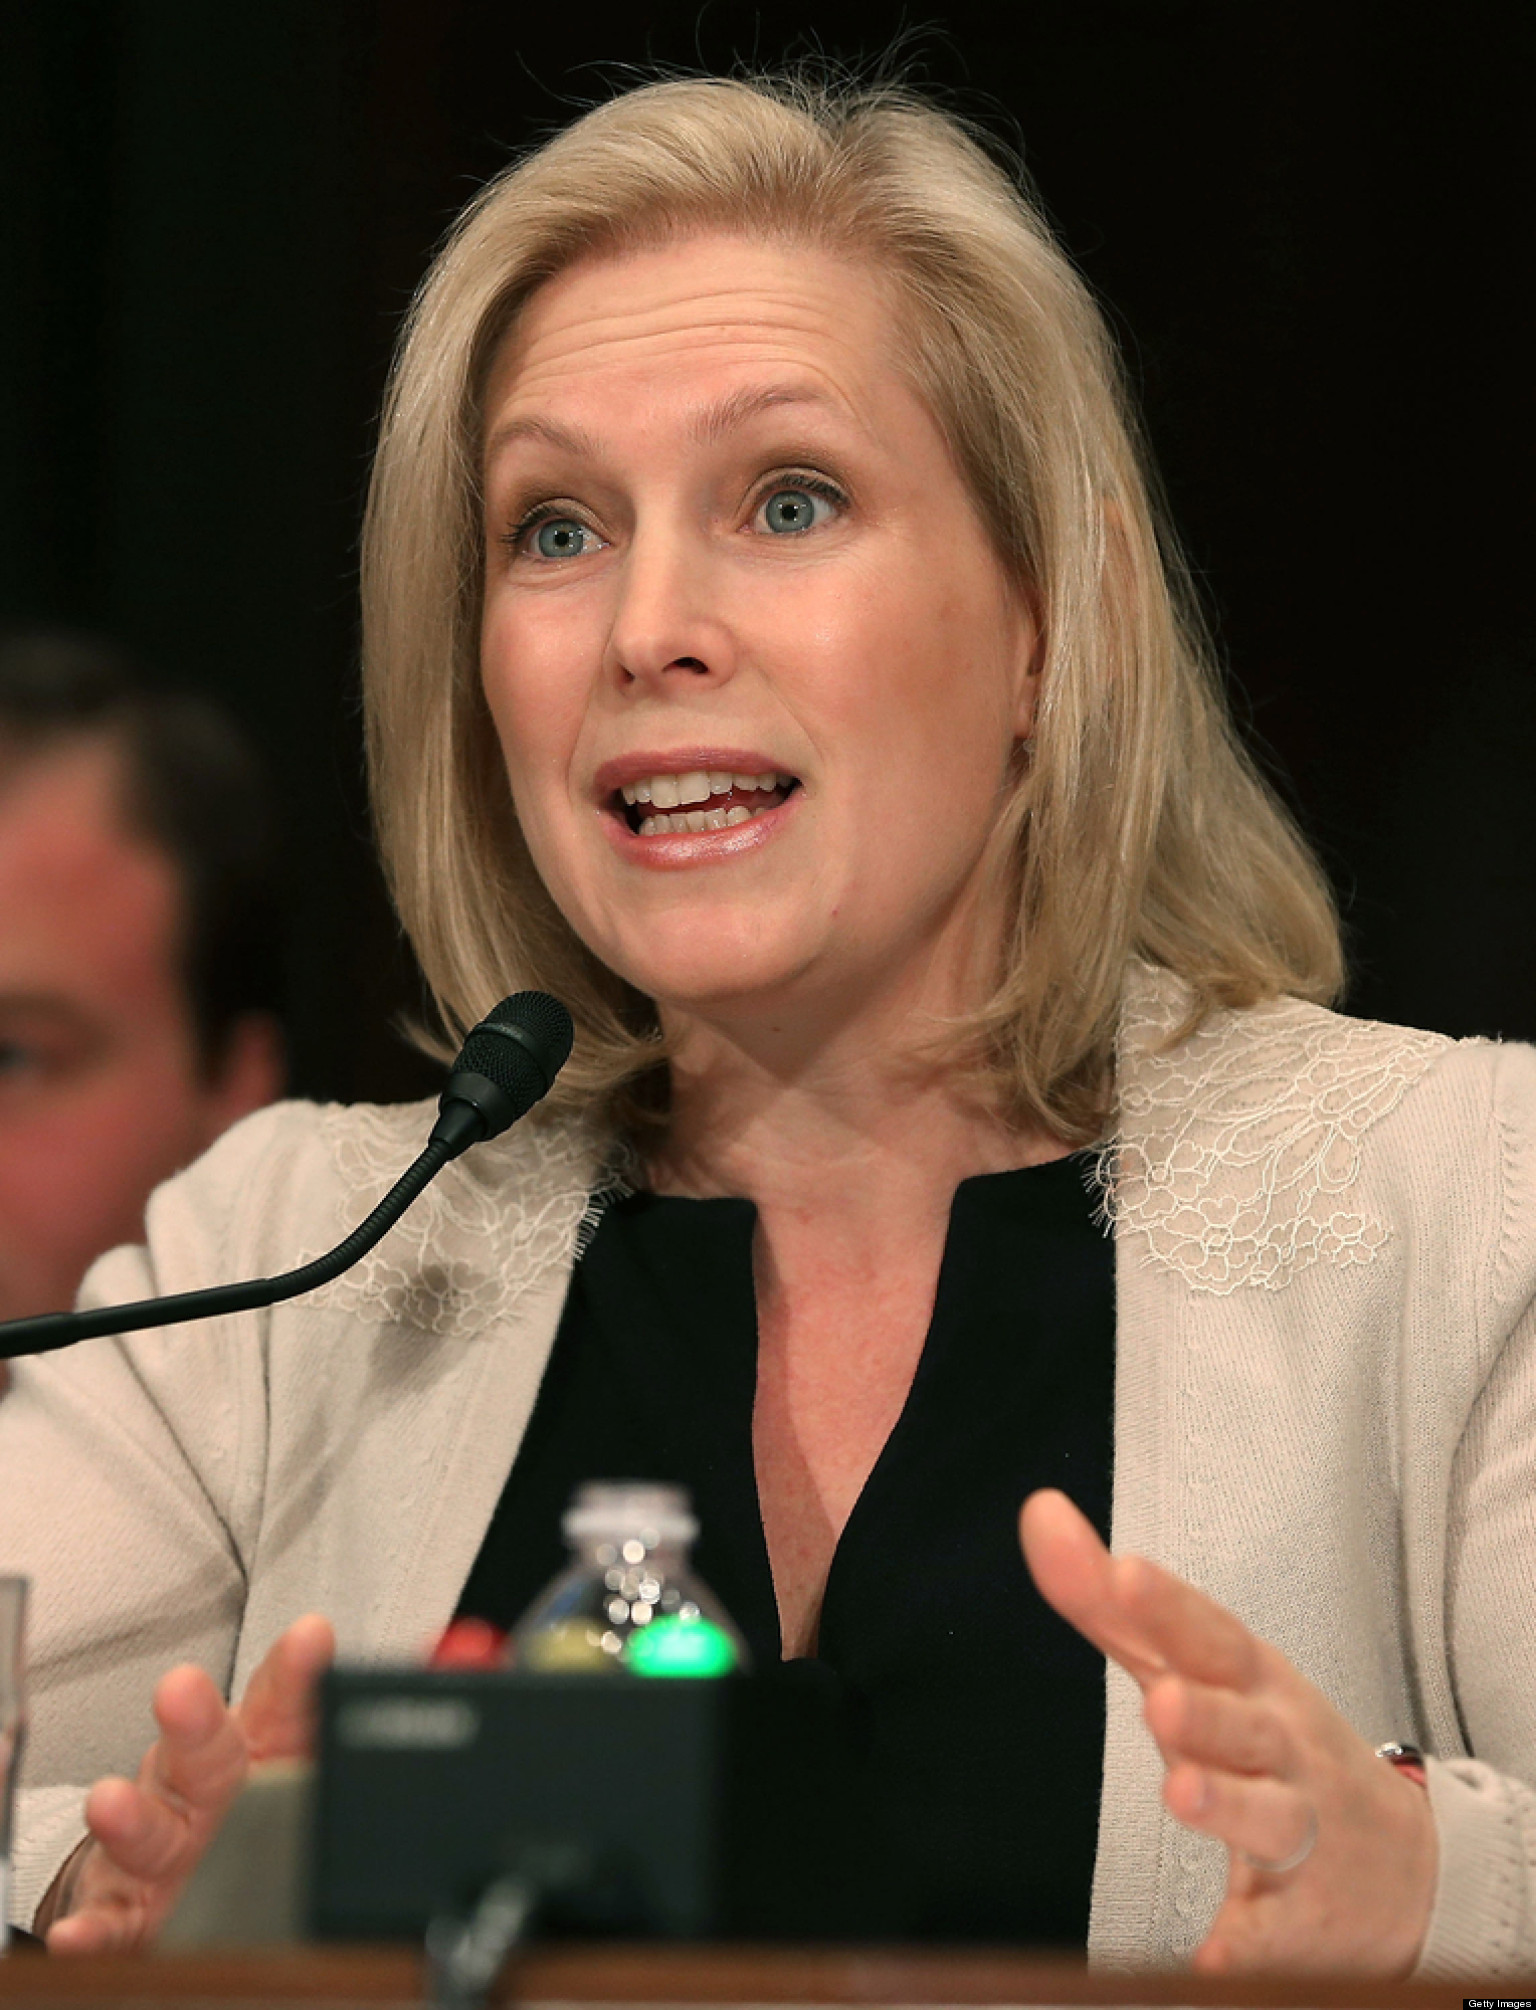 NPR Retracts Insights On 'Perky' Kirsten Gillibrand's 'Girlie Voice' | HuffPost